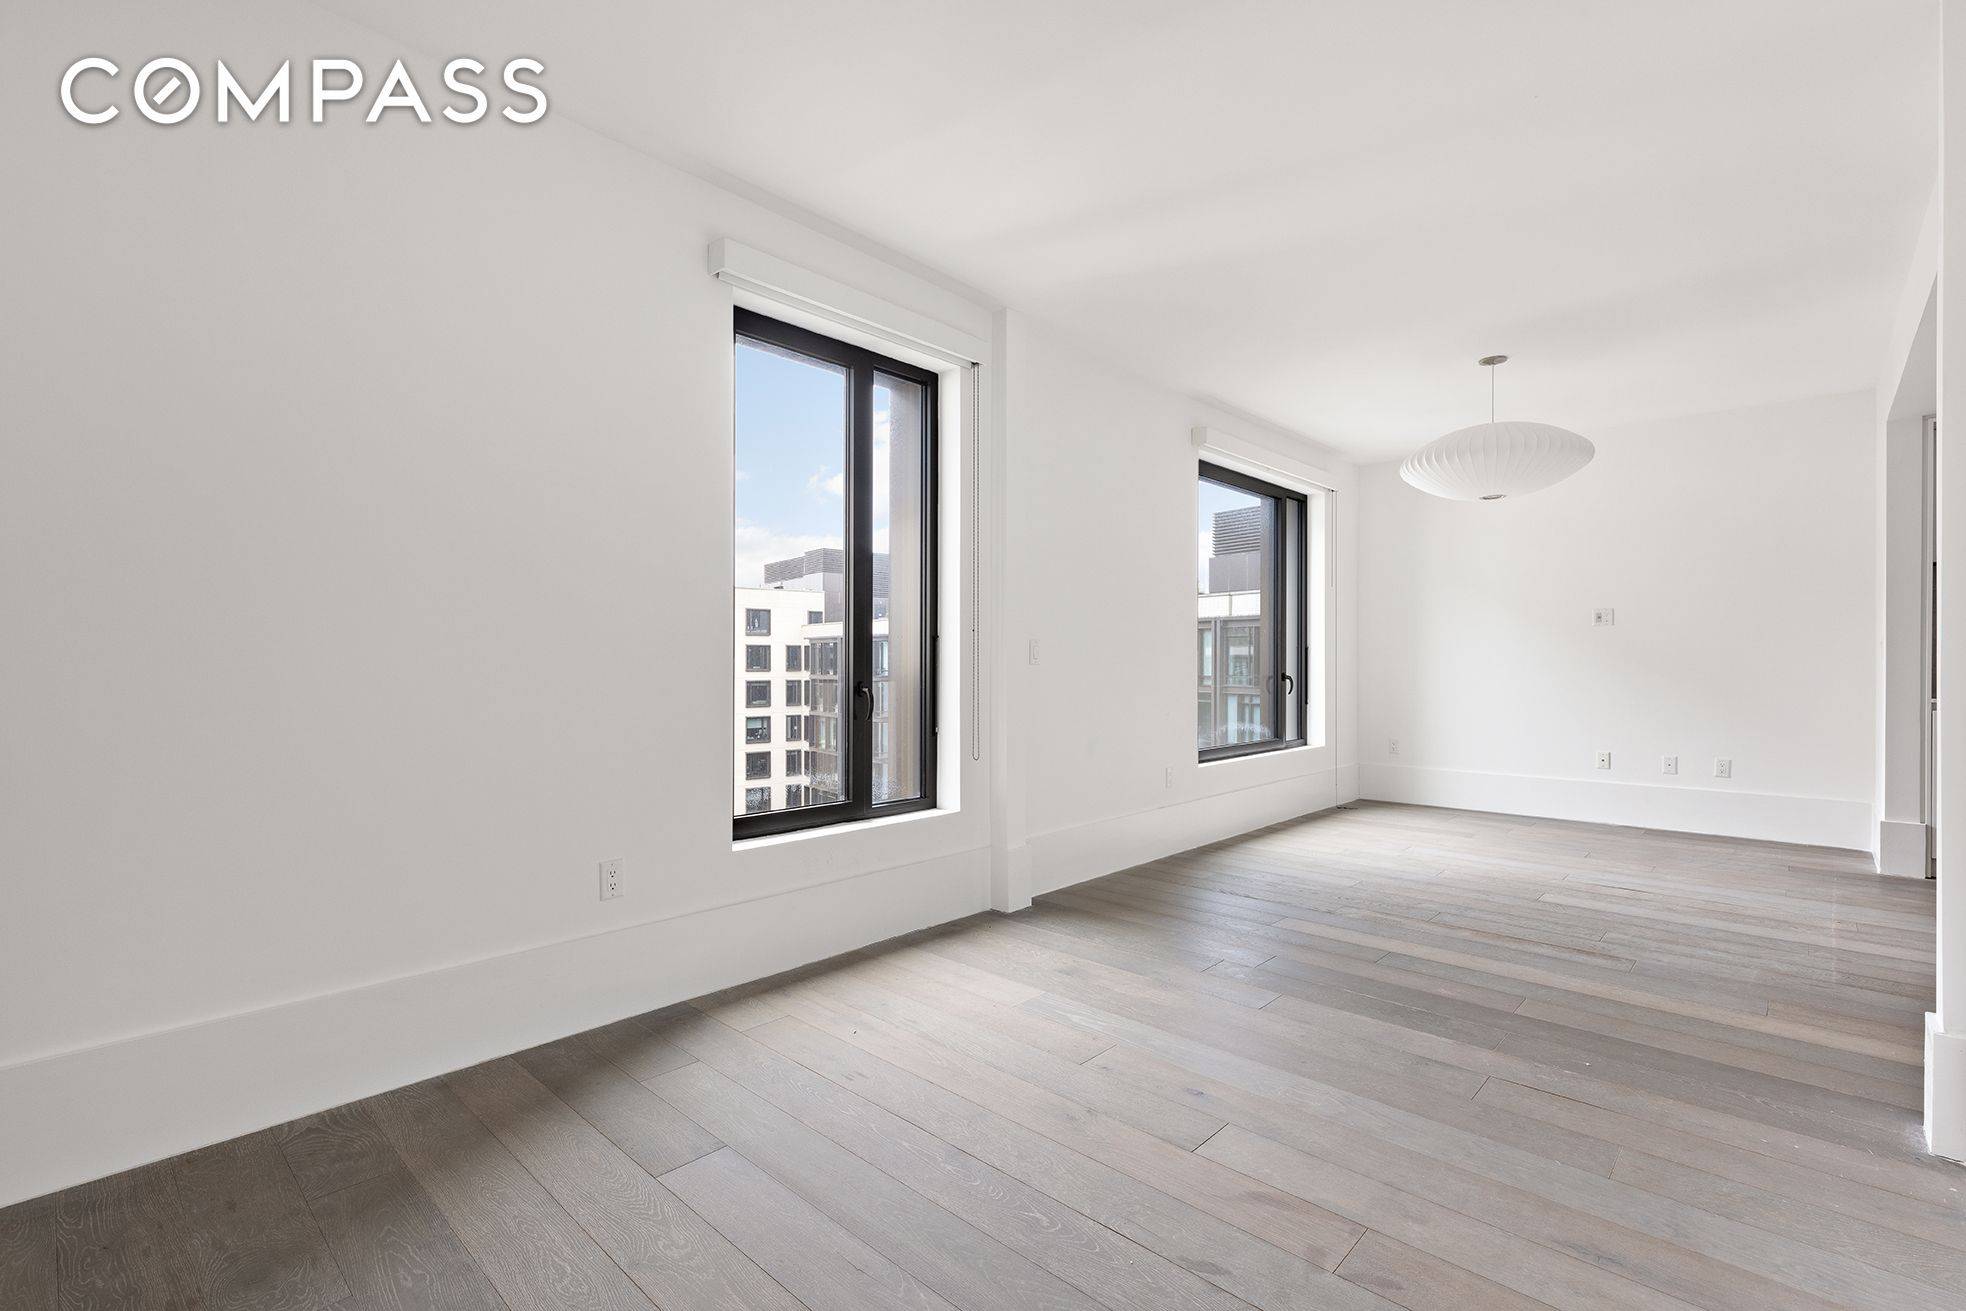 Situated on the top floor of South Williamsburg s most exciting new development, Apartment 837 features a thoughtful layout and impeccable design by legendary Dutch Designer, Piet Boon.